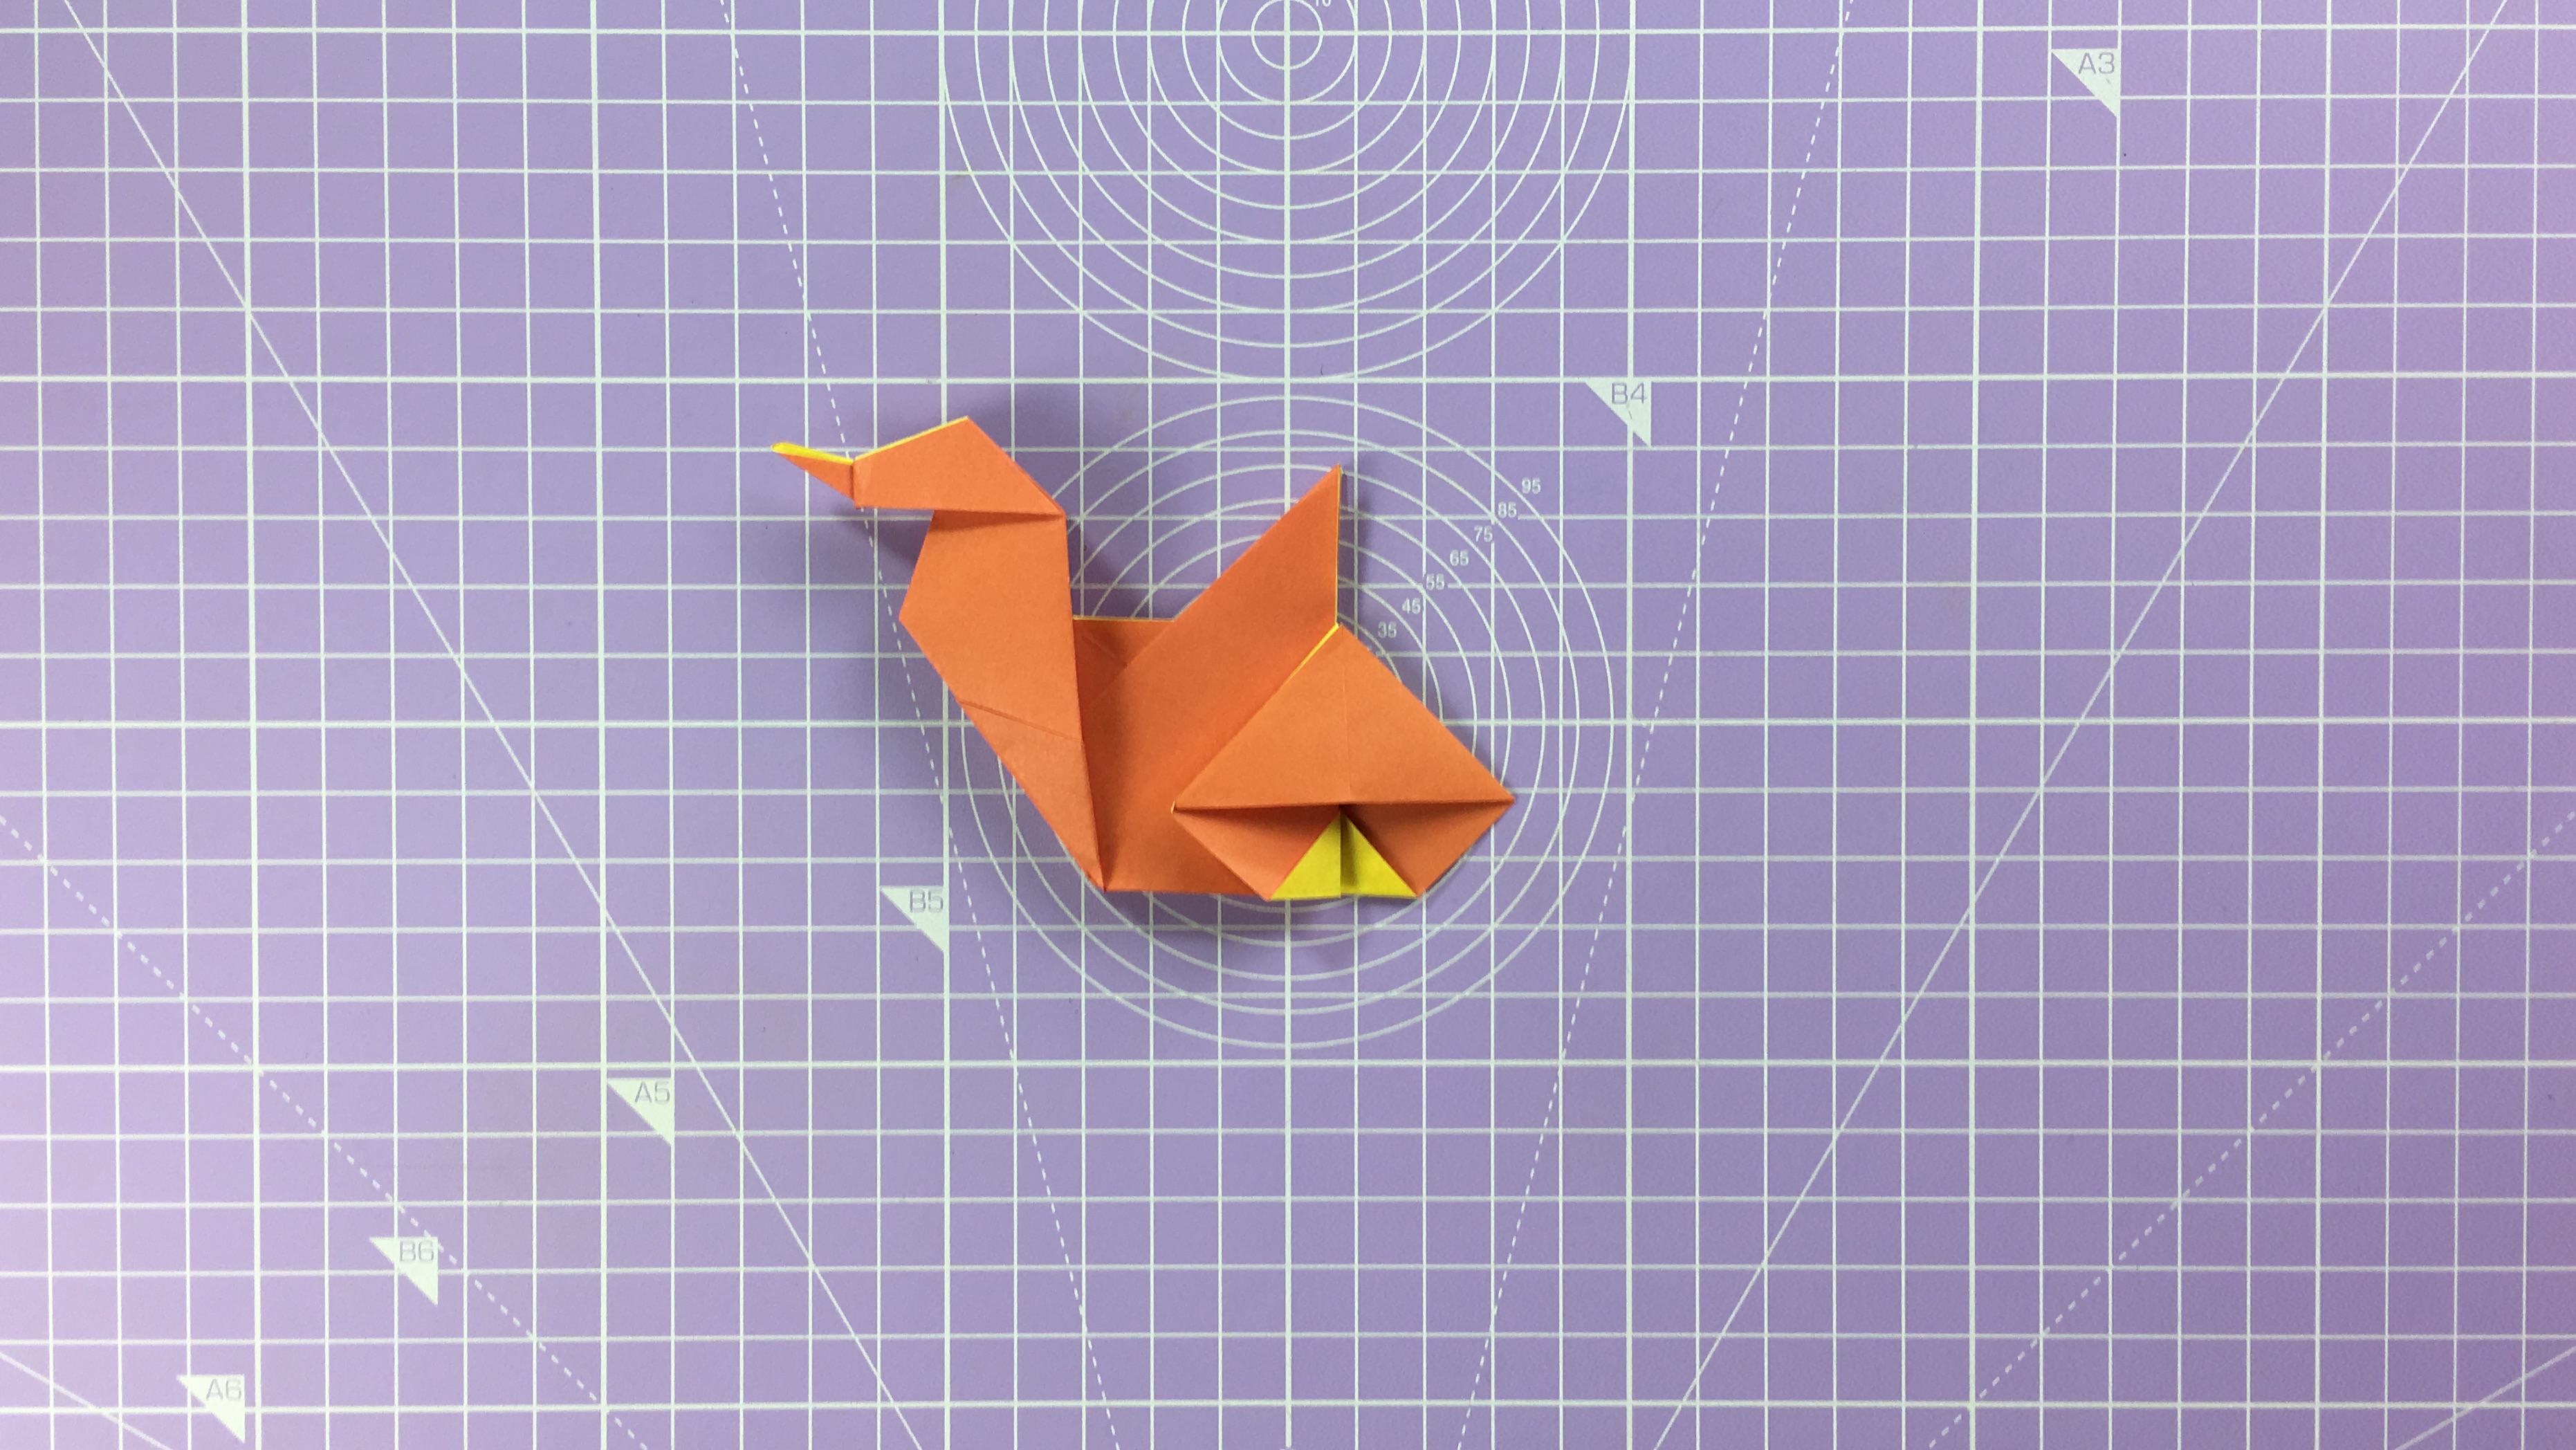 How to make an origami duck - step 18